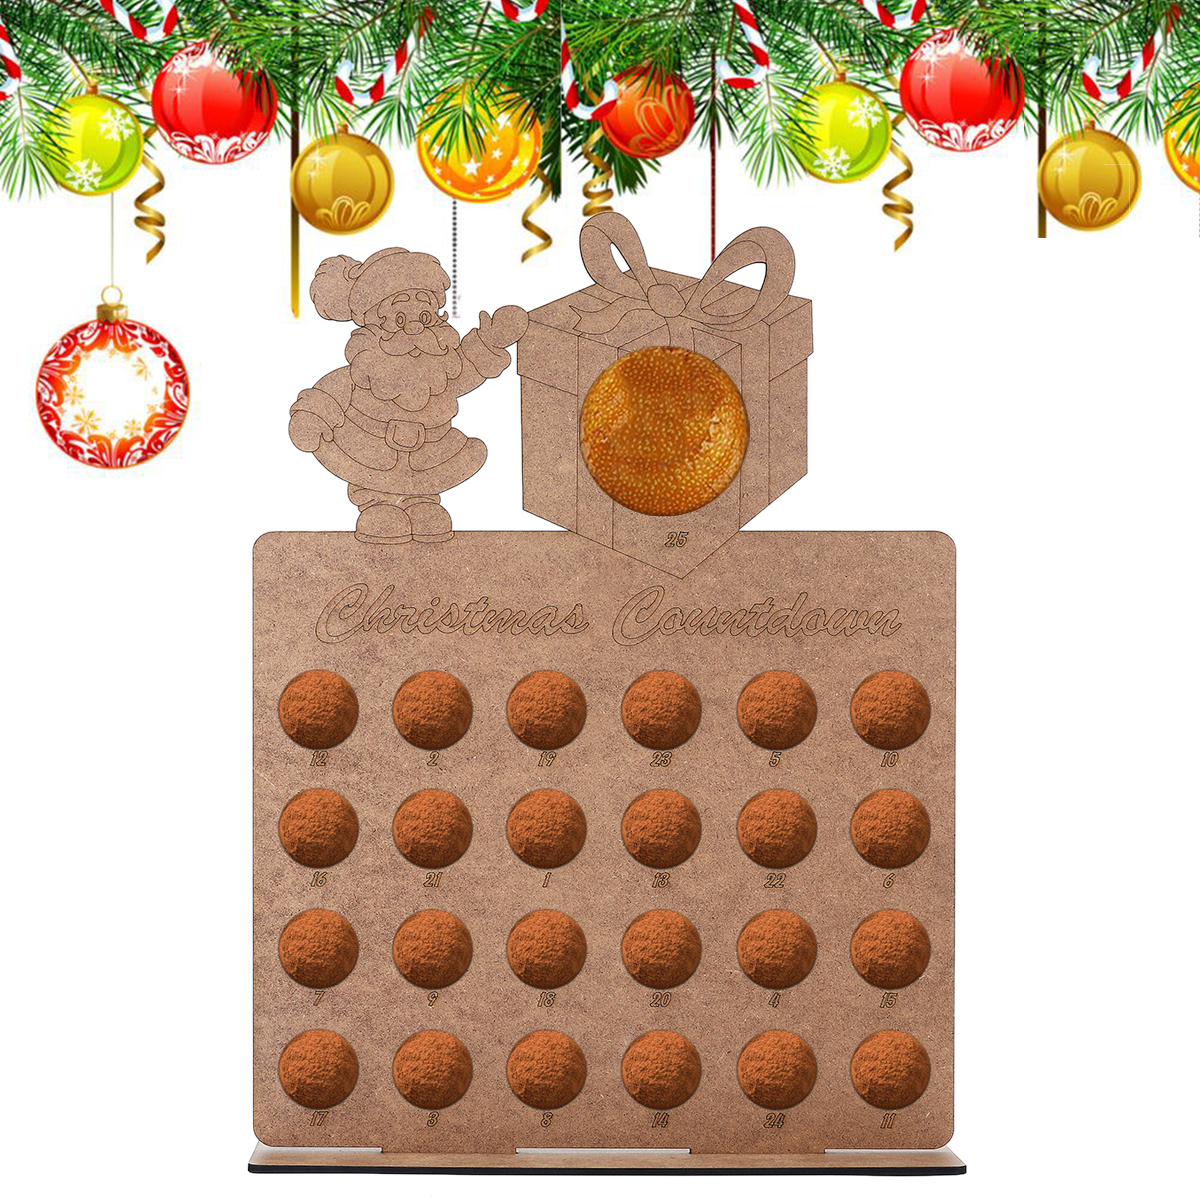 Wooden-Advent-Calendar-Christmas-Tree-24-Chocolates-Stand-Rack-Home-Decorations-1458956-1